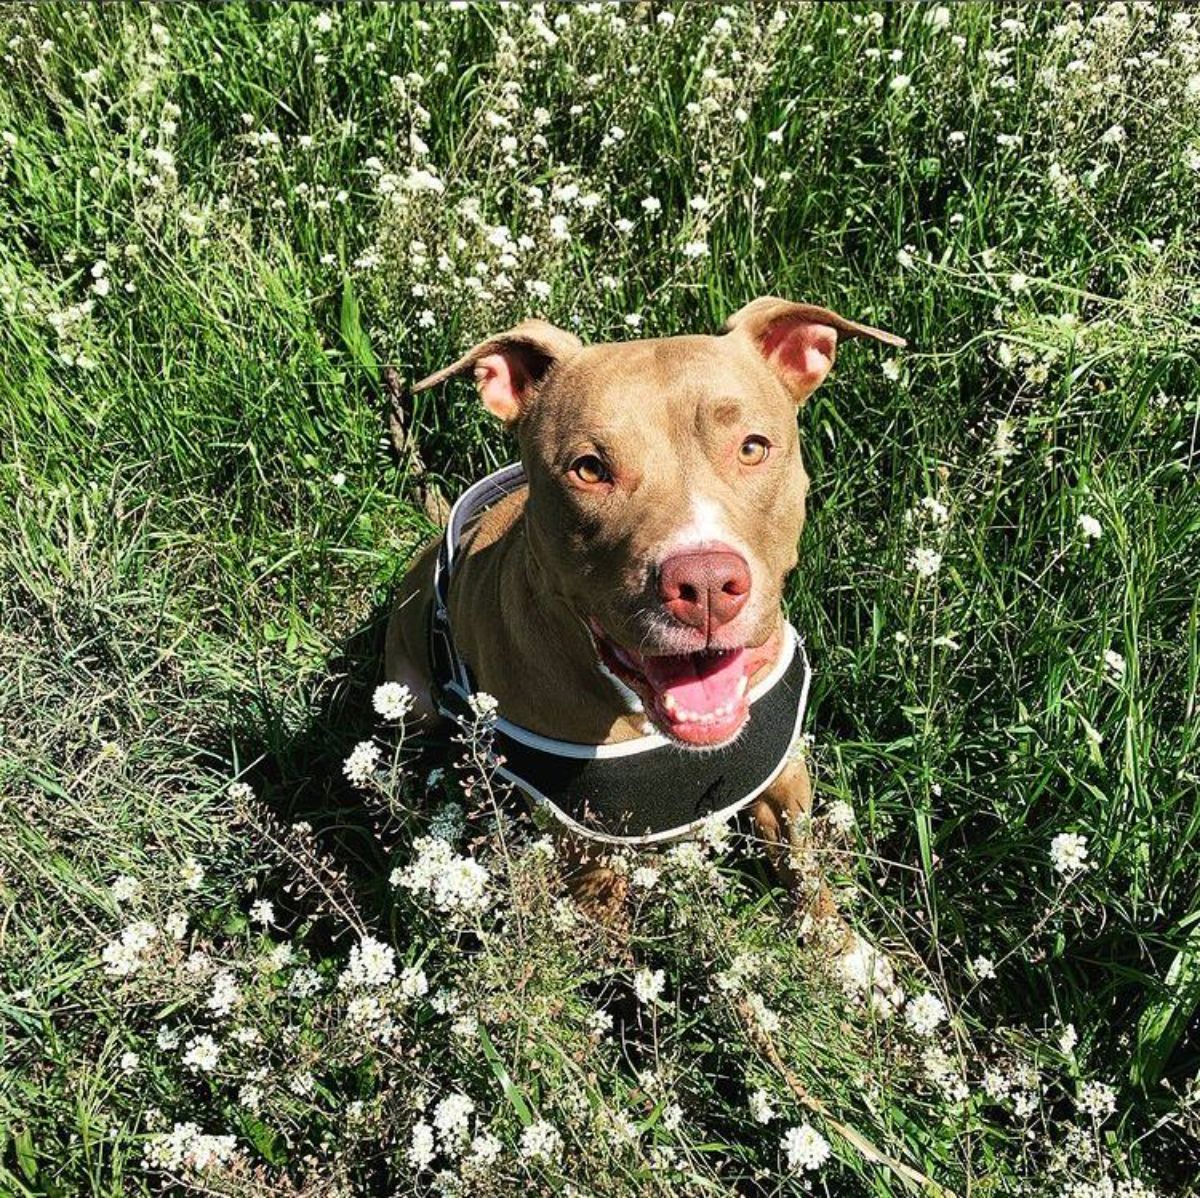 Staffordshire Bull Terrier having fun in the middle of the field of wildflowers